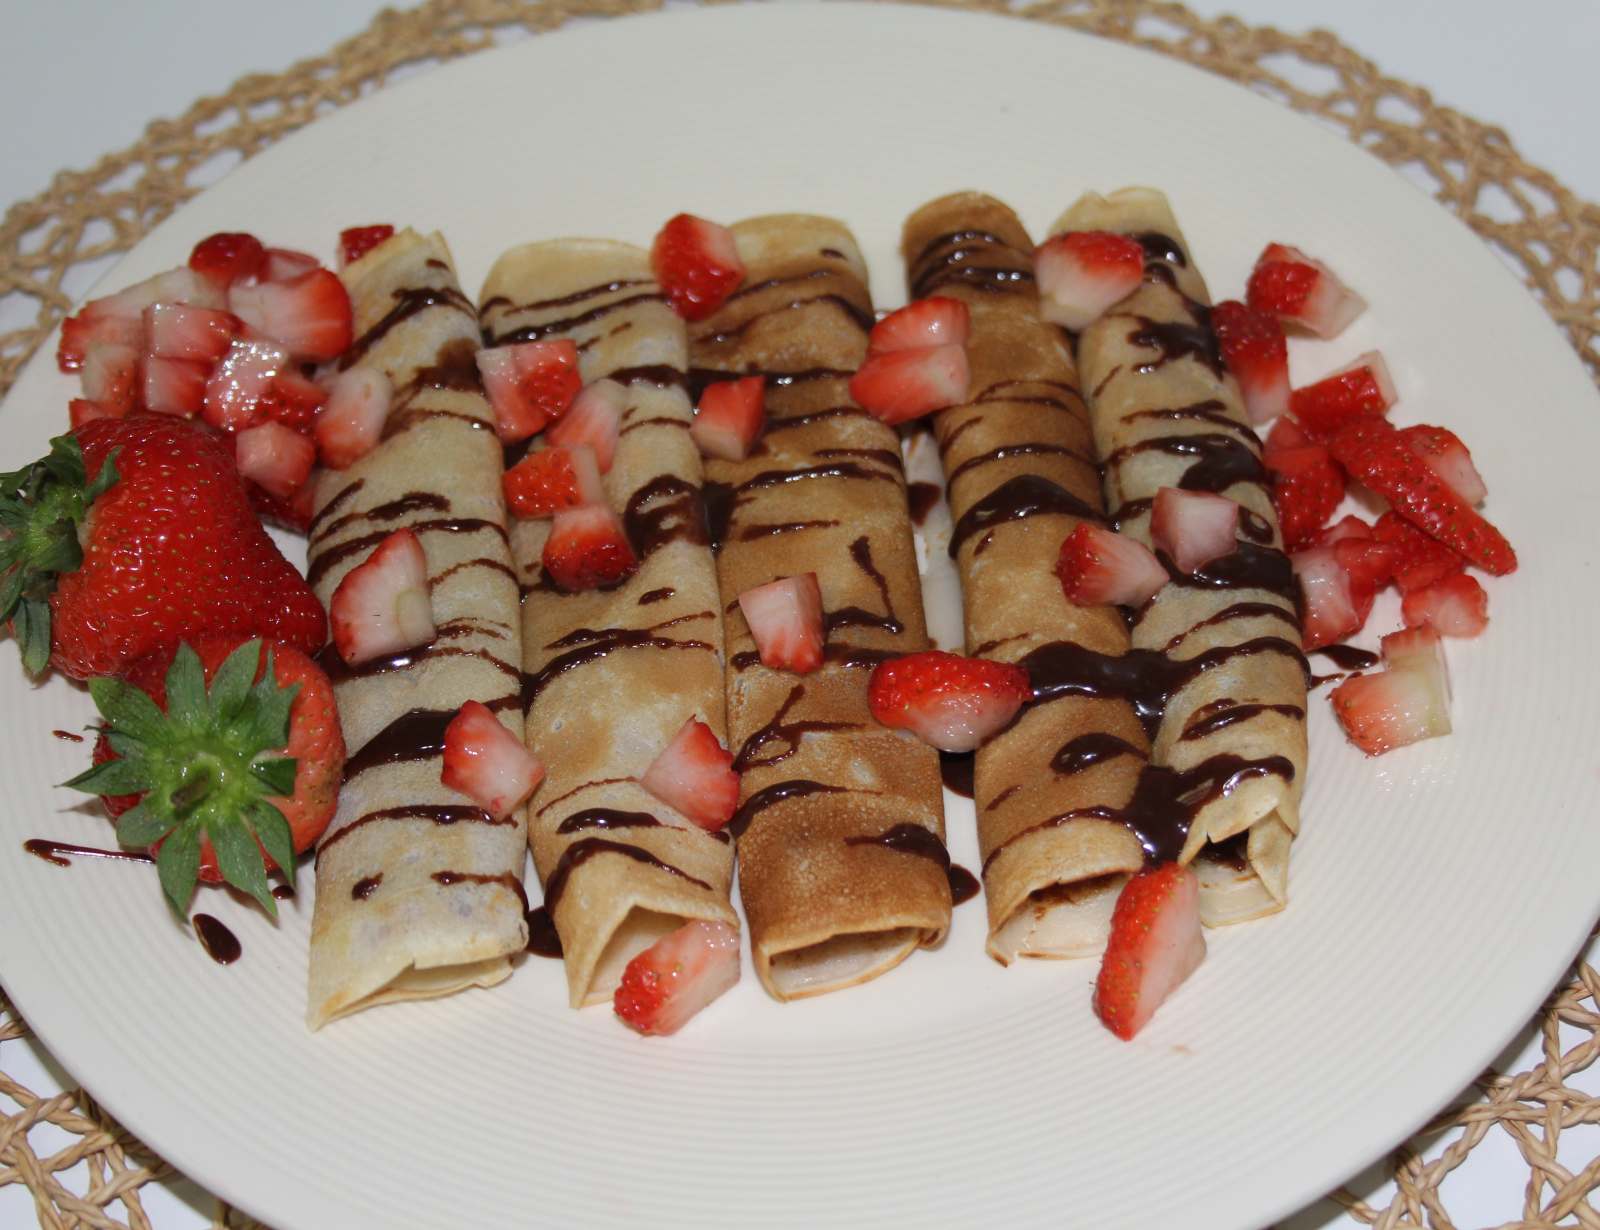 Eggless Nutella Crepes With Strawberries Recipe